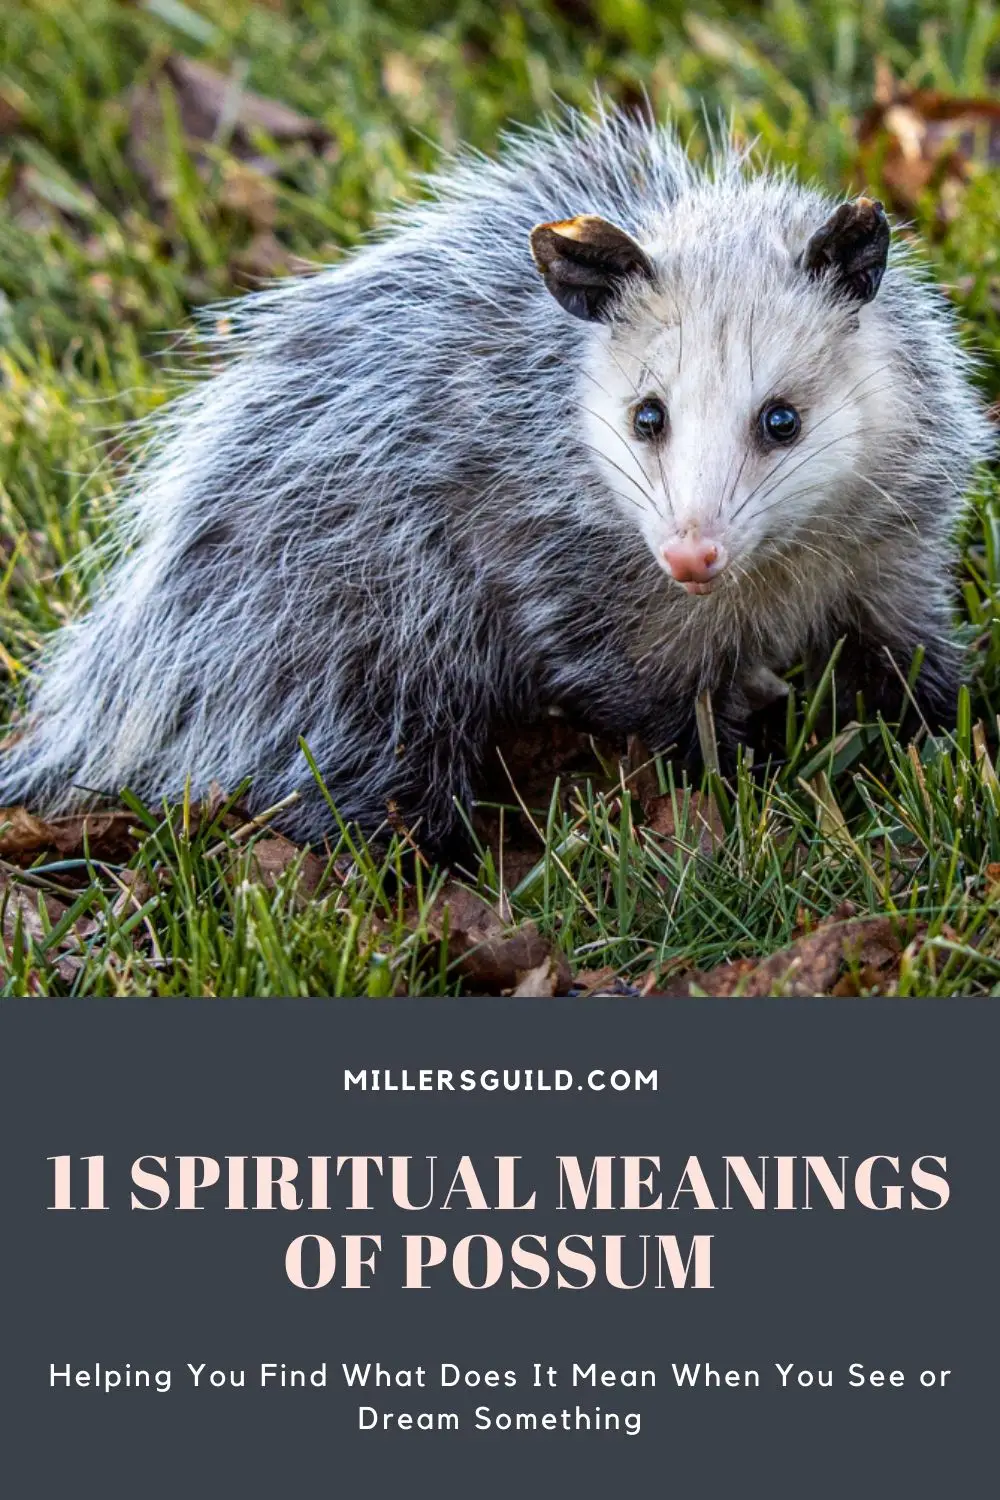 What Does It Mean To See A Possum During The Day?